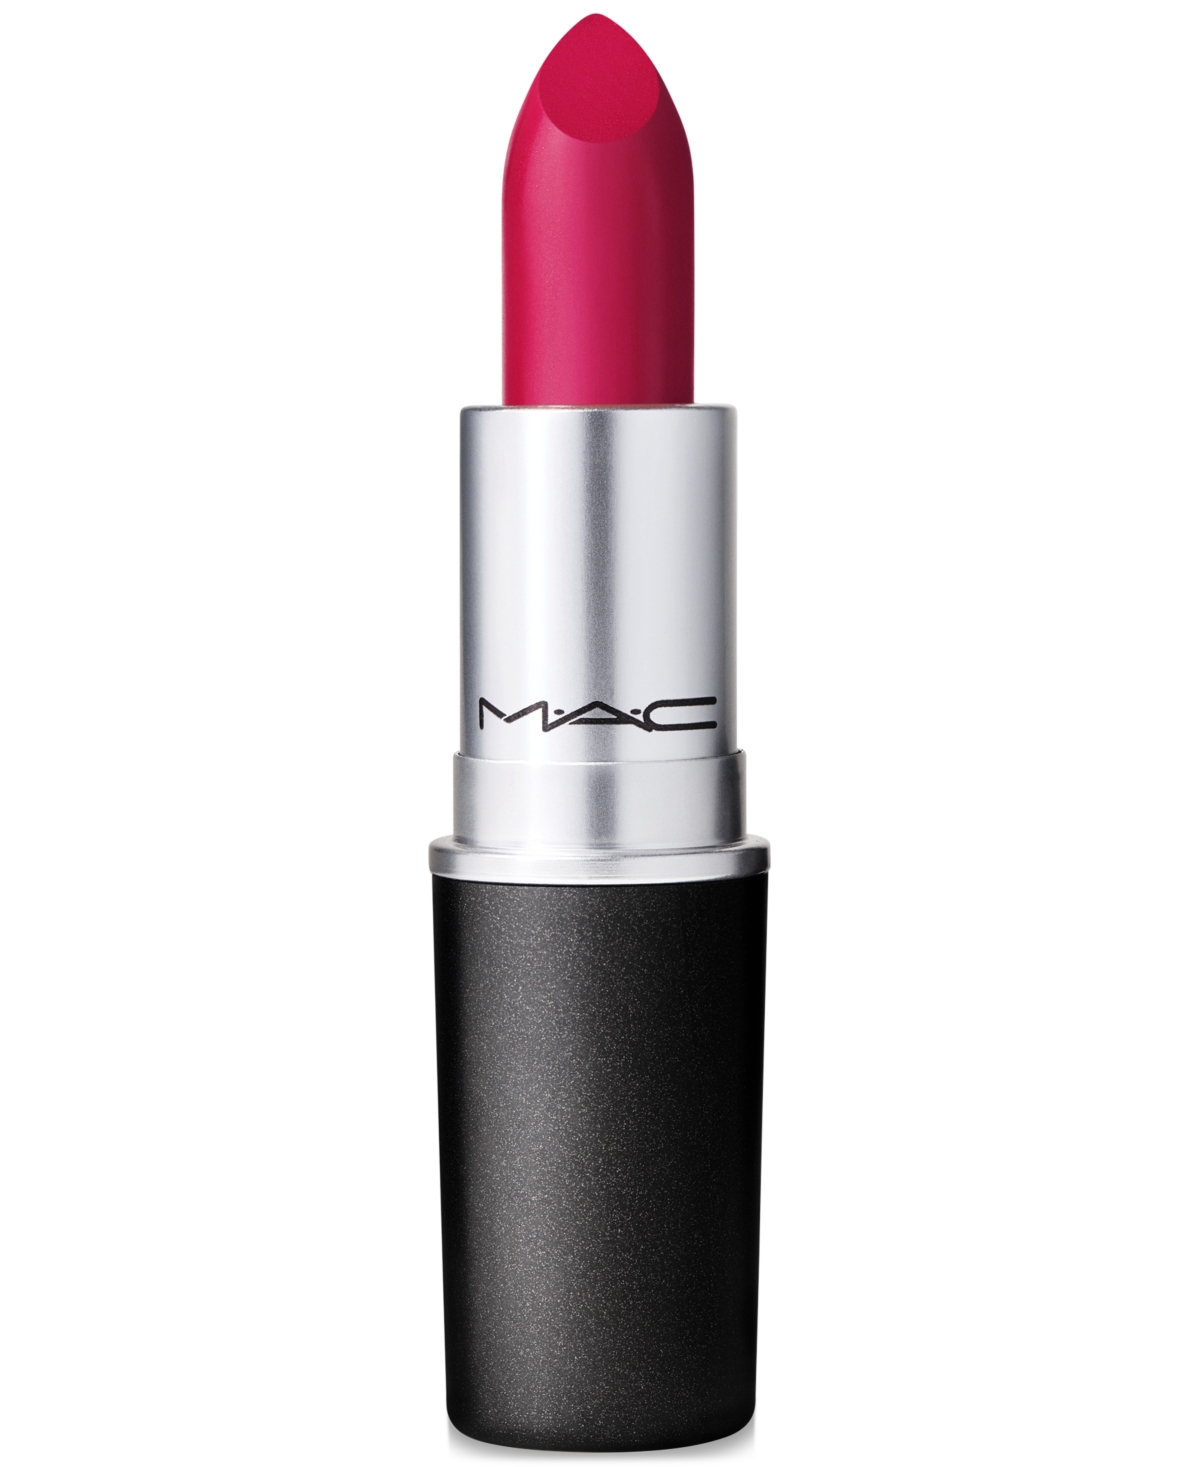 Mac Re-think Pink Amplified Lipstick In Lovers Only (raspberry)